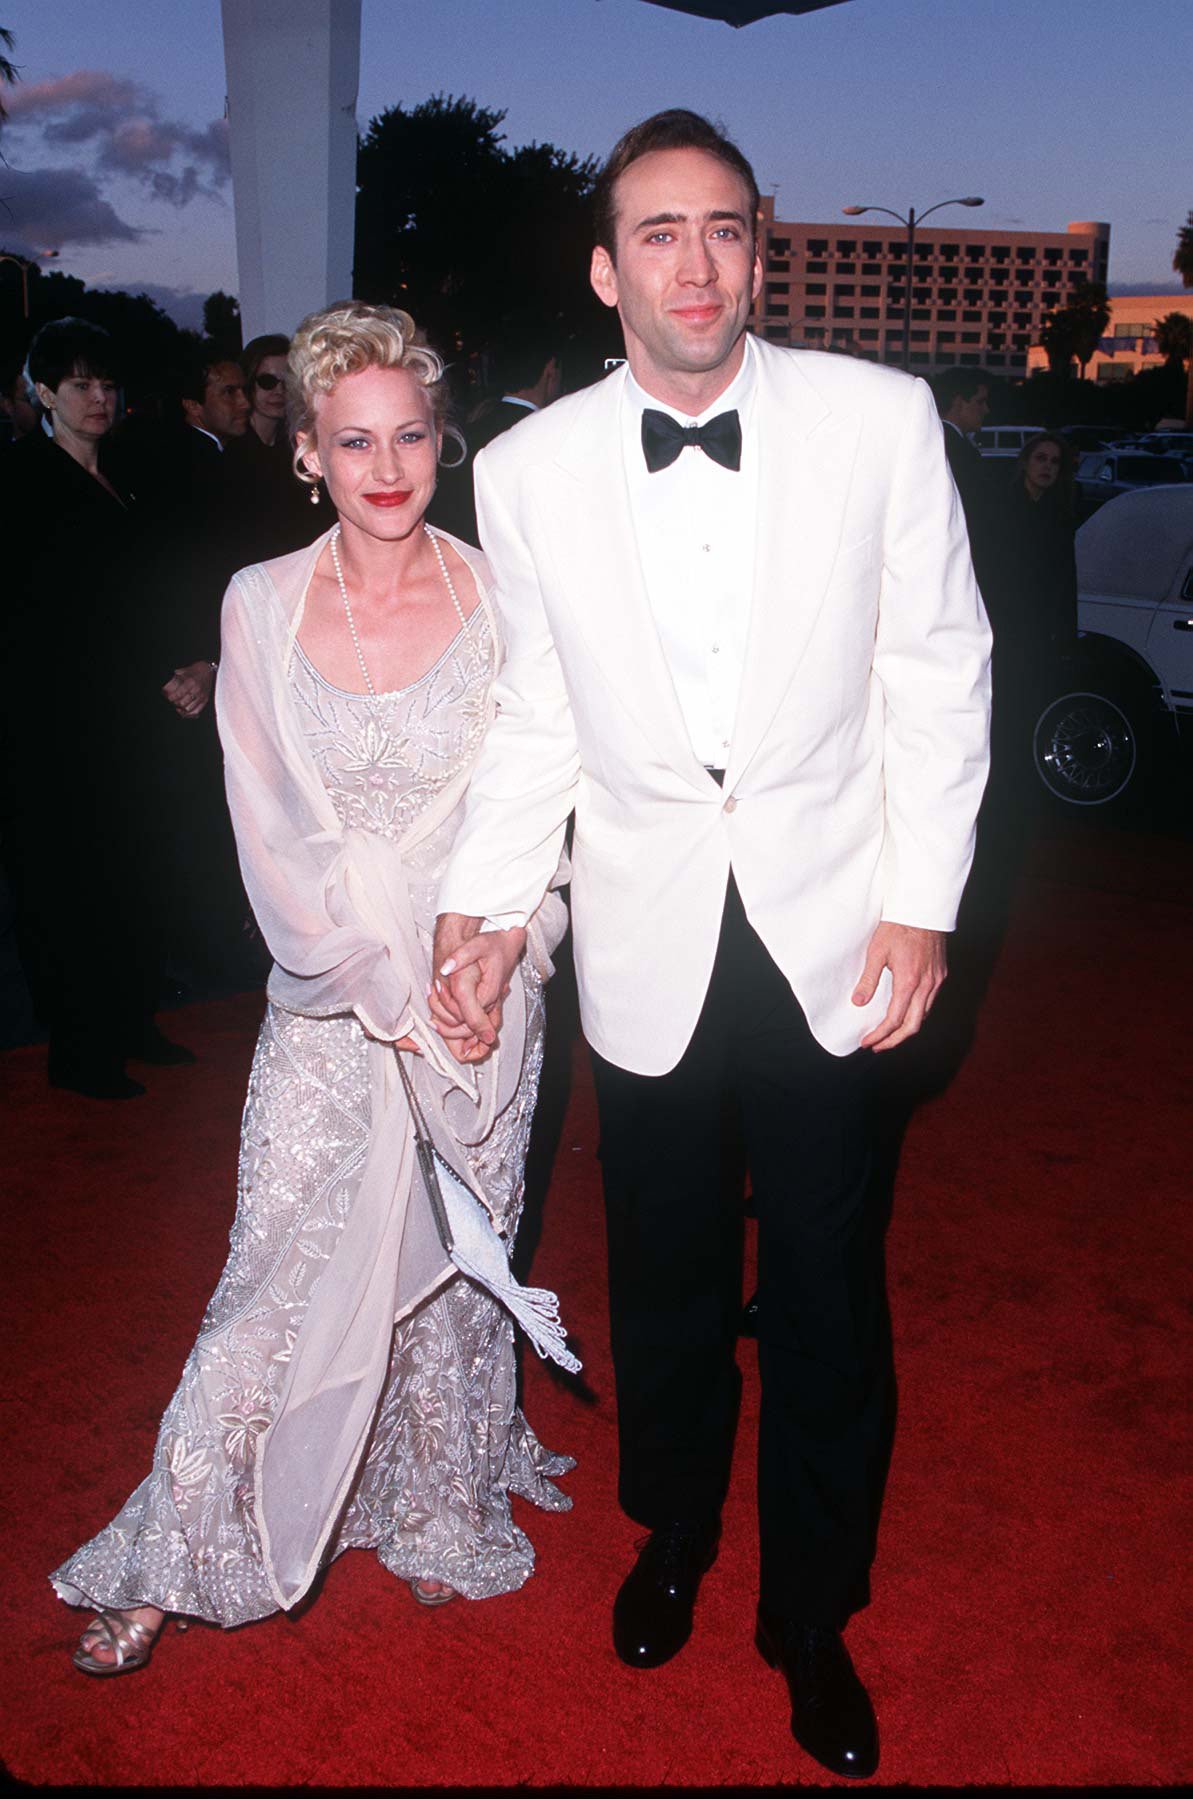 Actor Nicolas Cage and actress Patricia Arquette during 2nd Annual Screen Actors Guild Awards at Santa Monica Civic Auditorium in Santa Monica, California. / Source: Getty Images